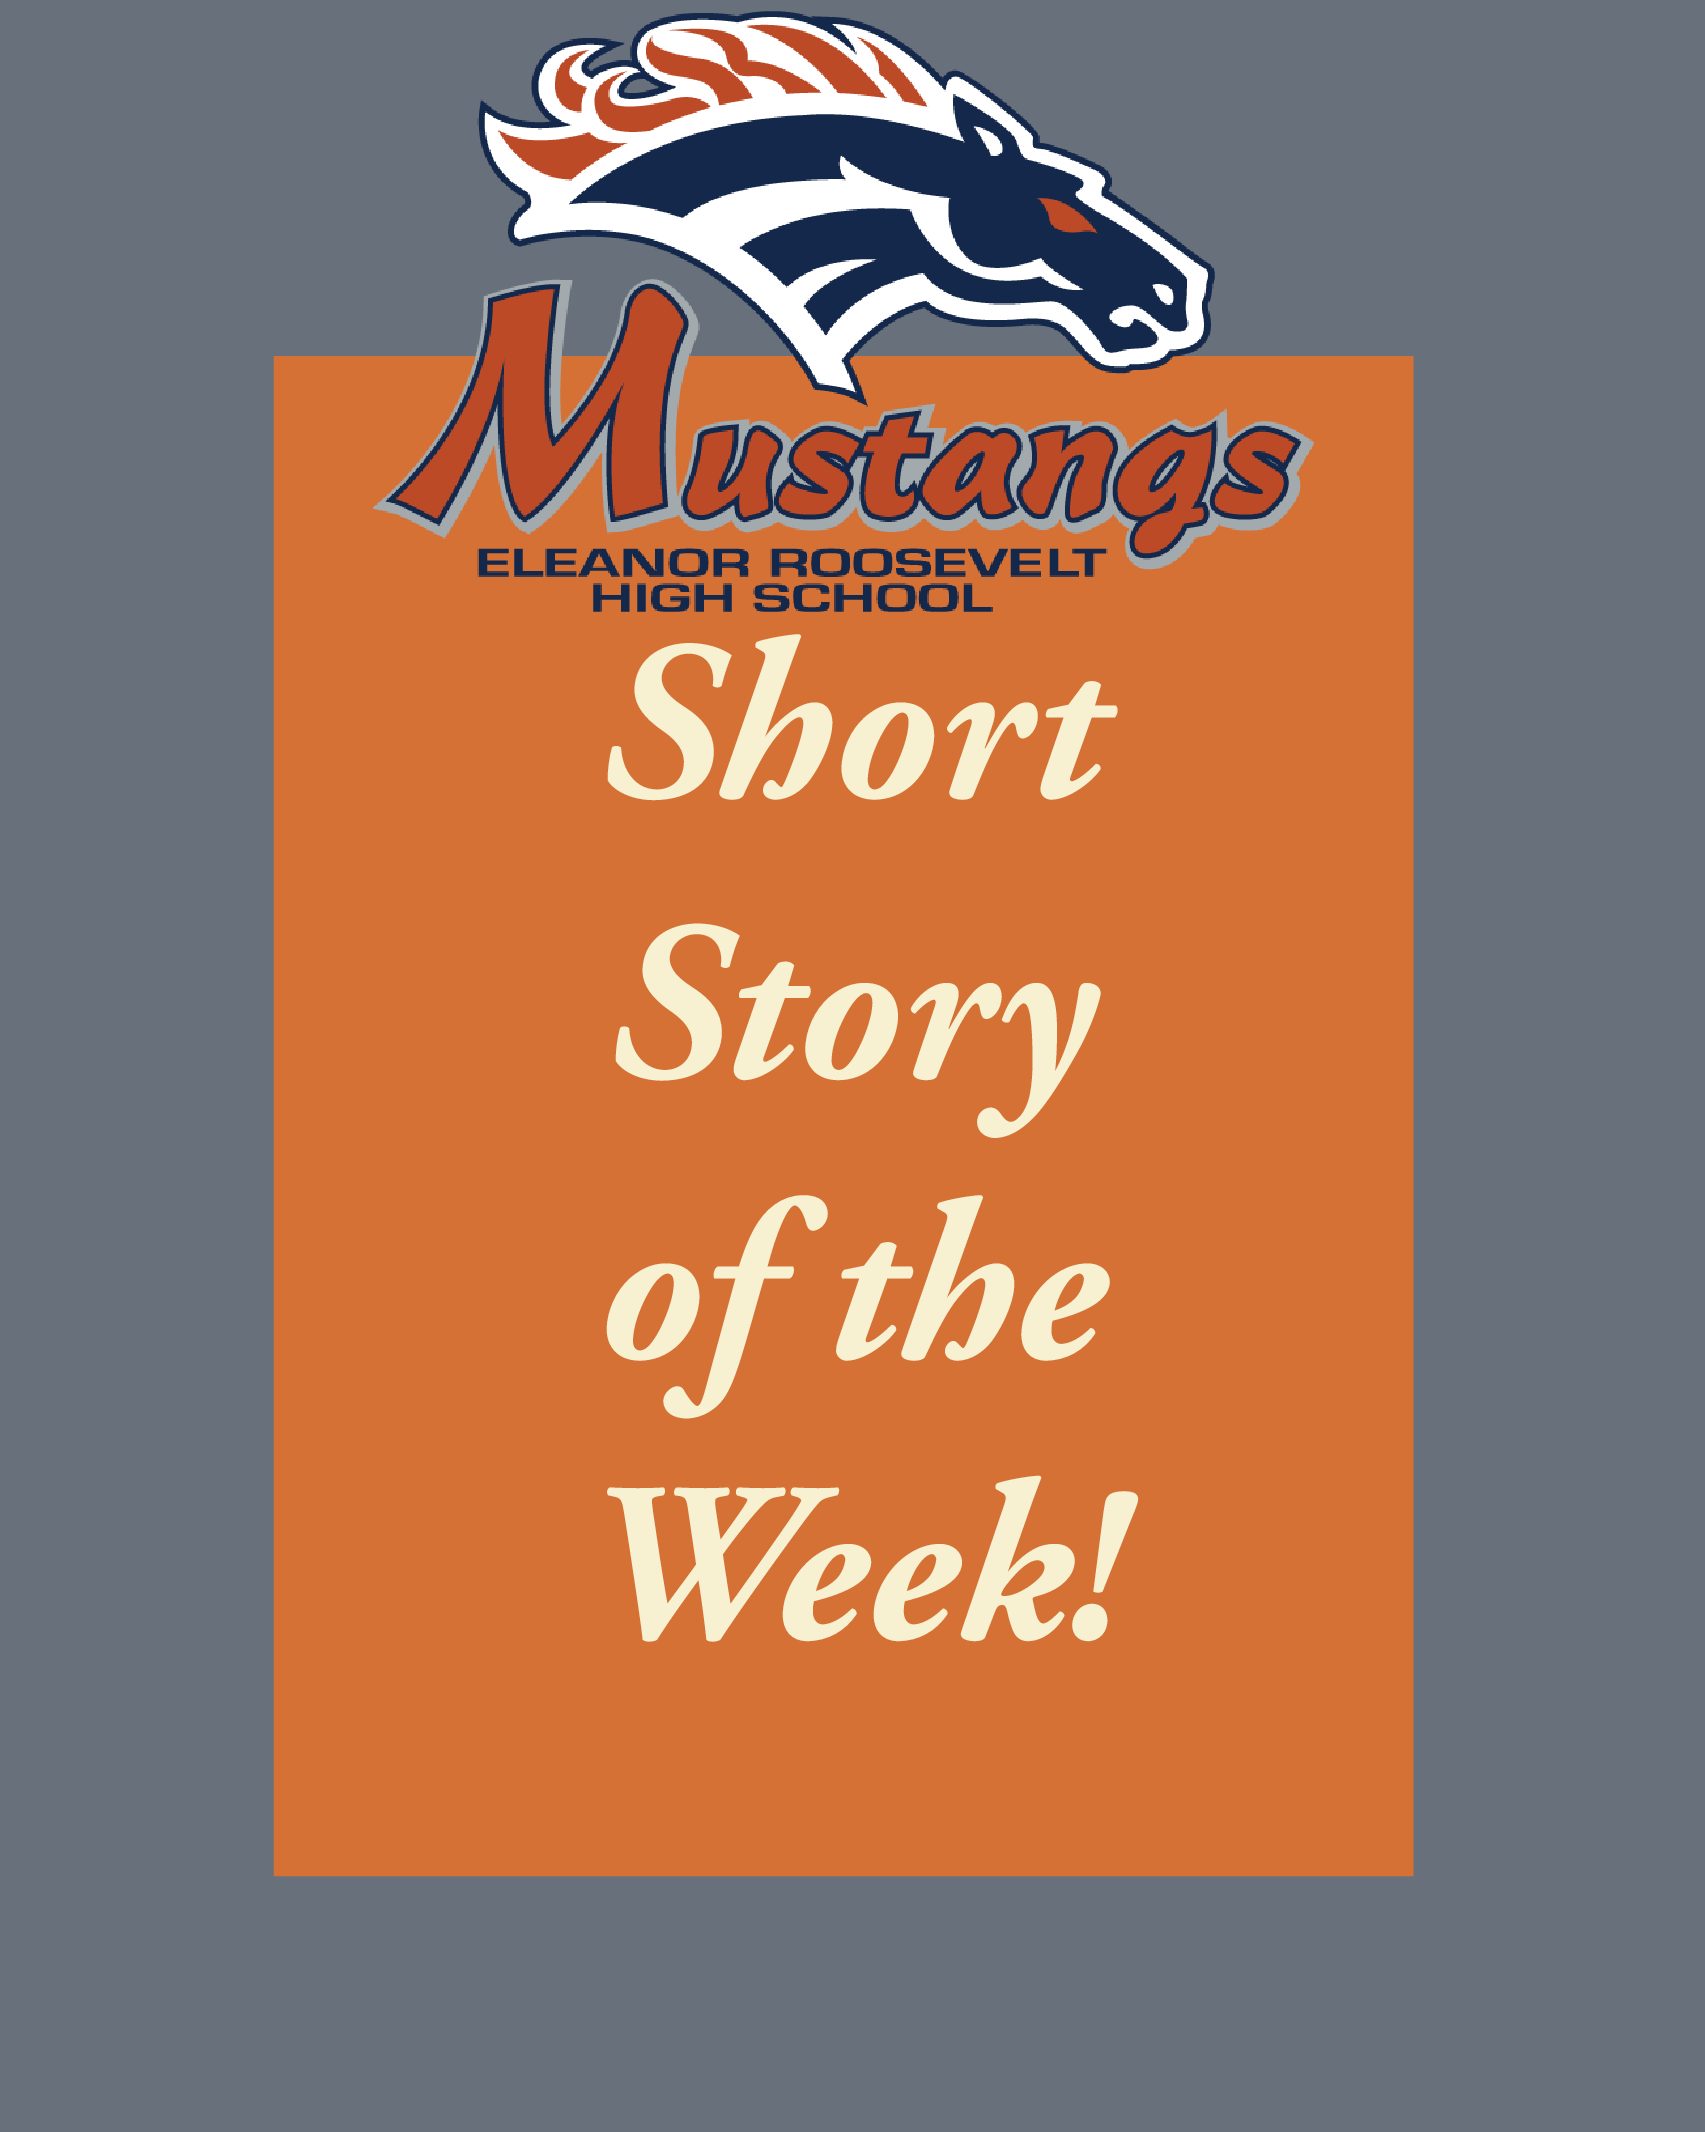 Short Story of the Week!